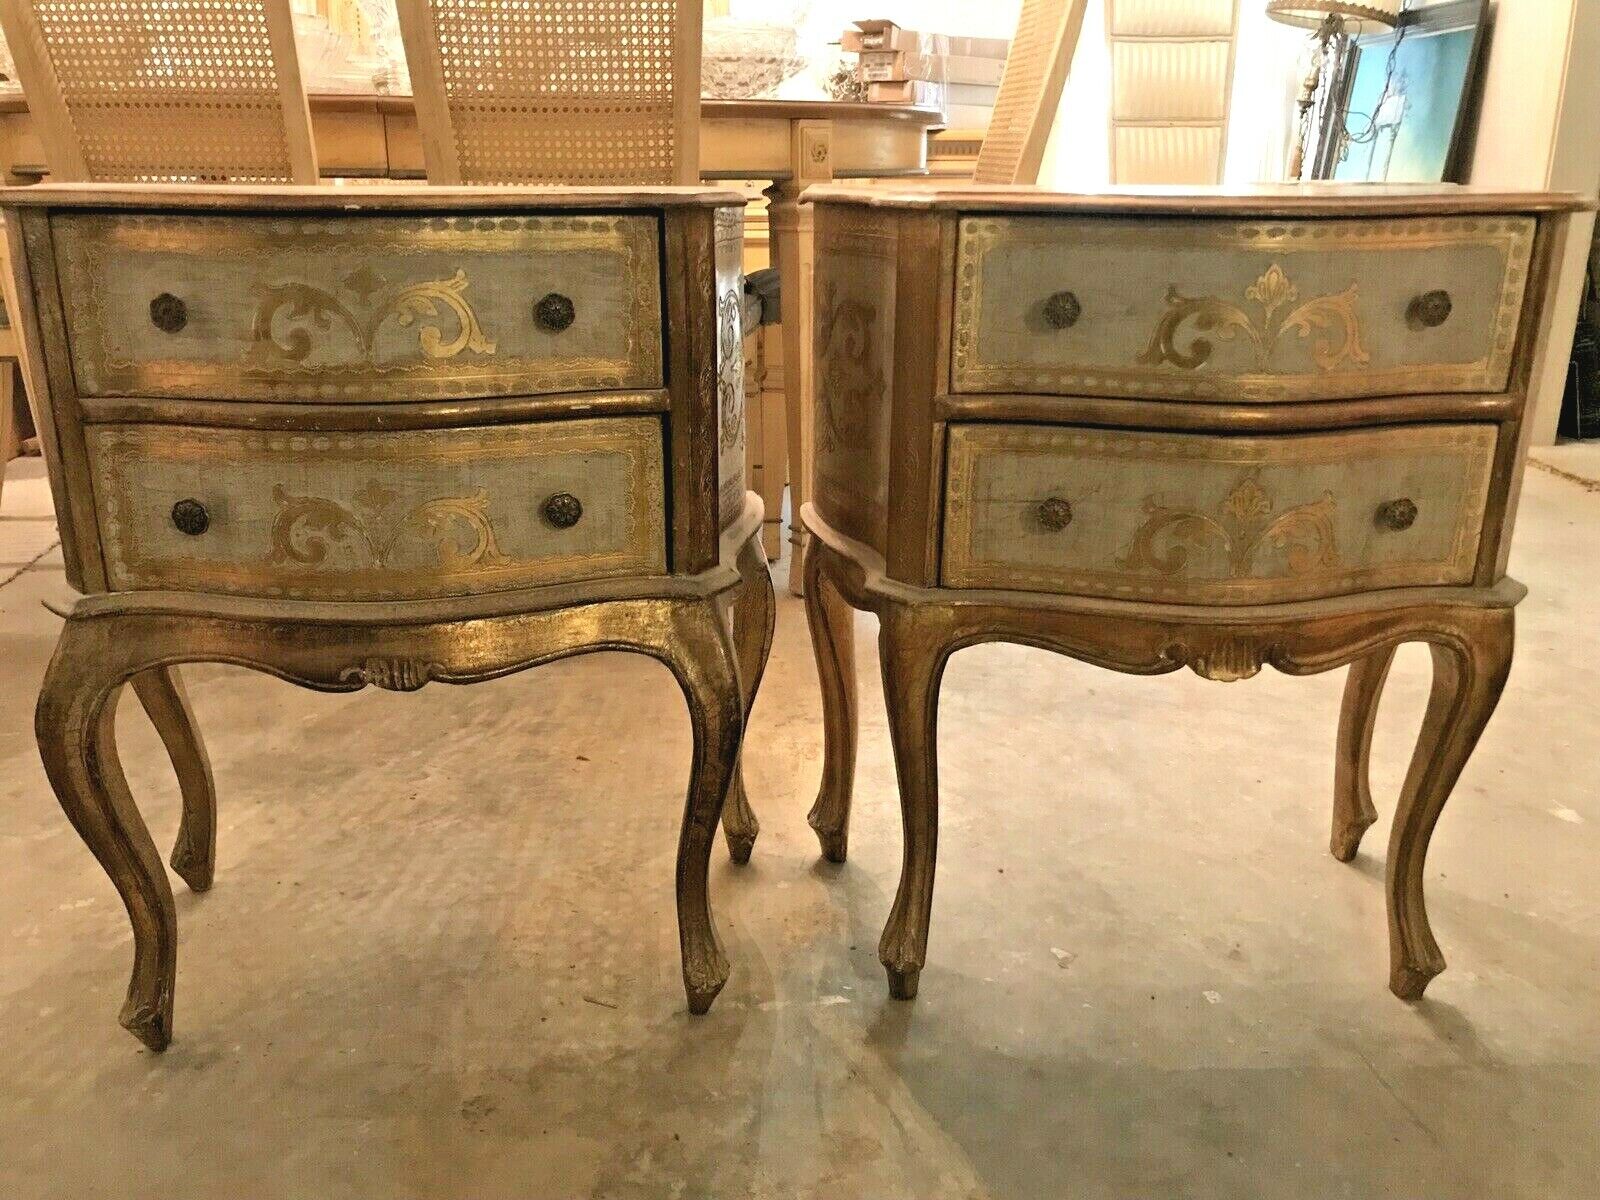 RARE! Set of Italian Florentine Gold Gilt Wooden Side Tables With Drawers Без бренда